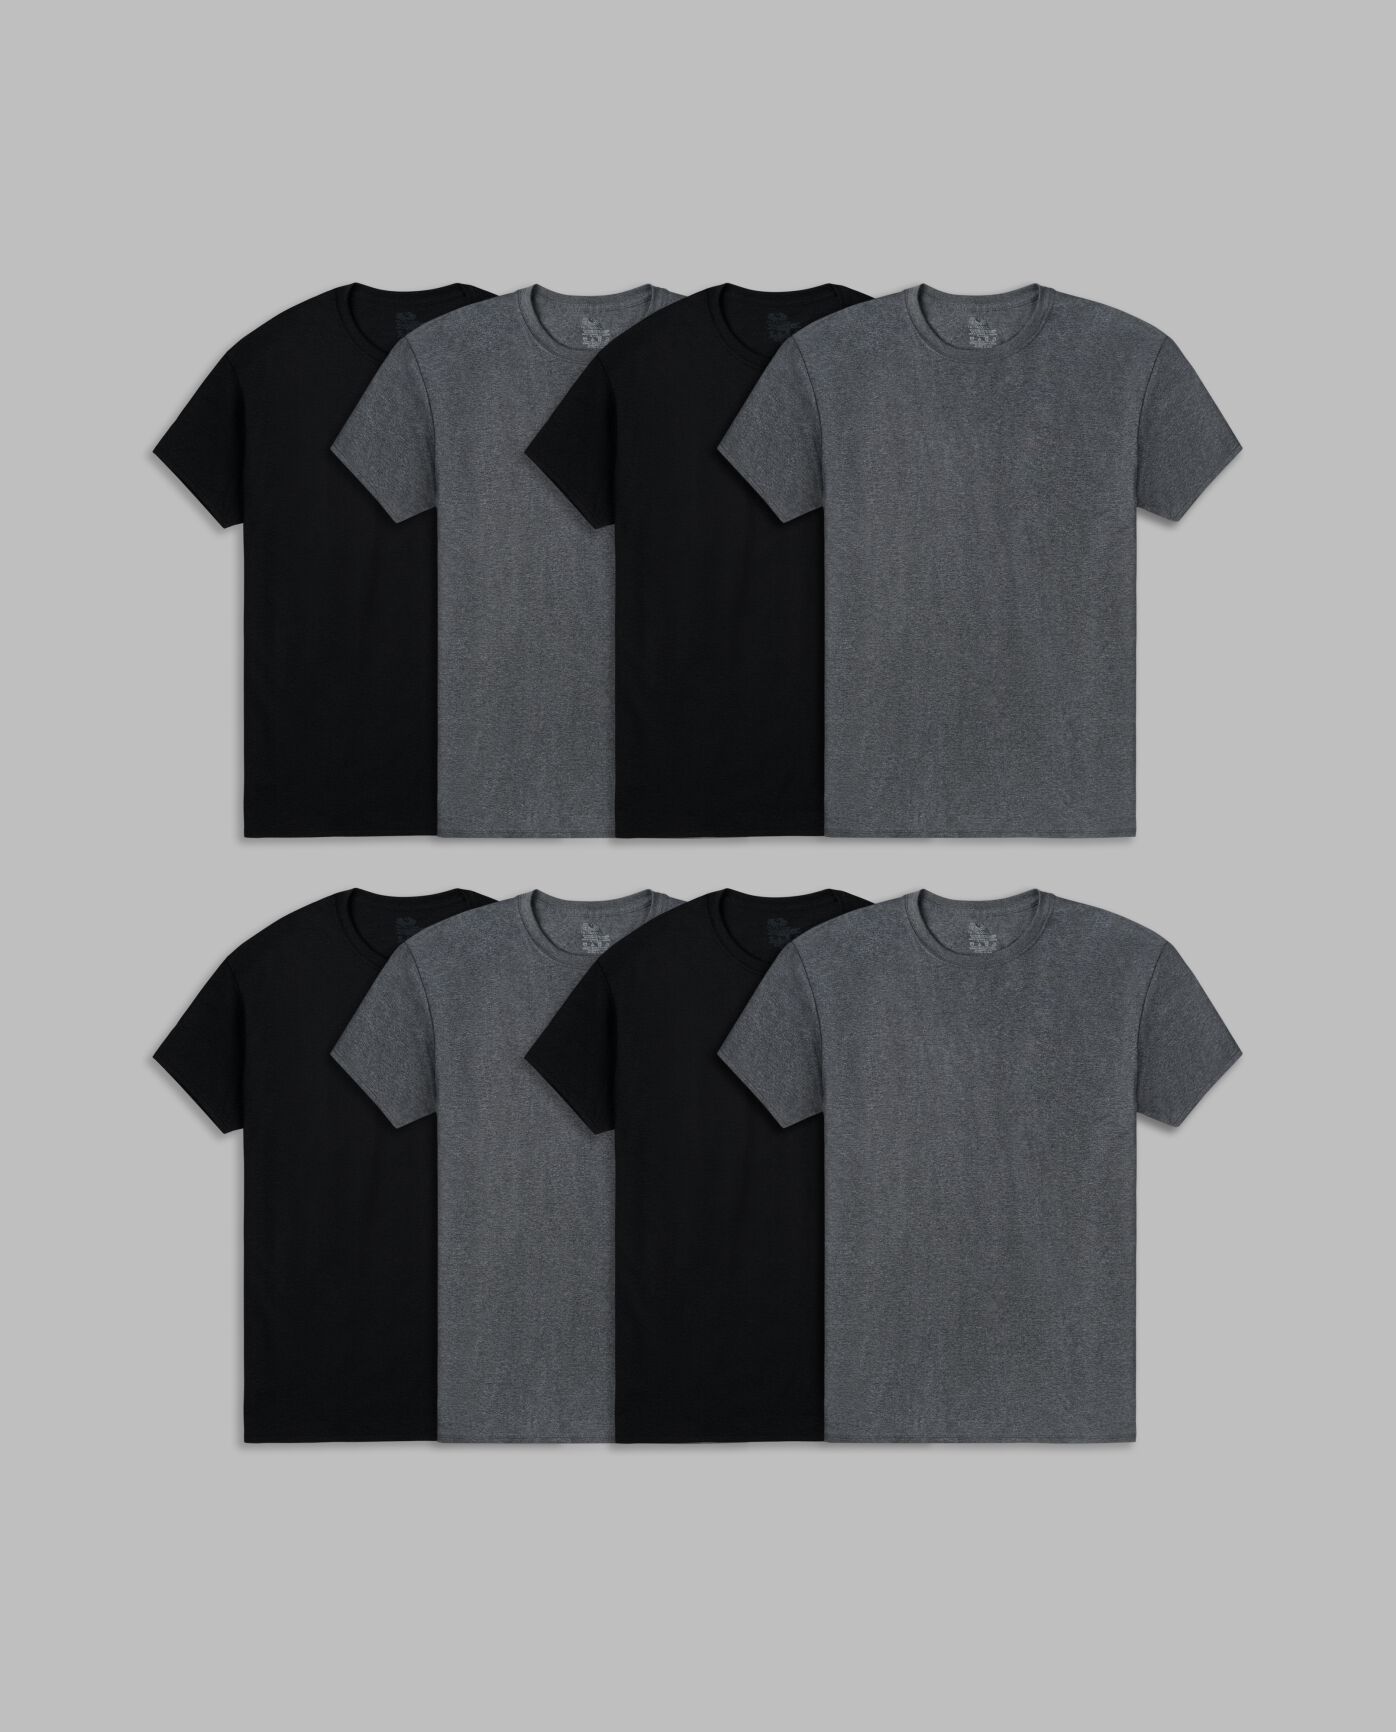 Men's Short Sleeve Active Cotton Crew T-Shirt, Black and Gray 8 Pack Black and Gray